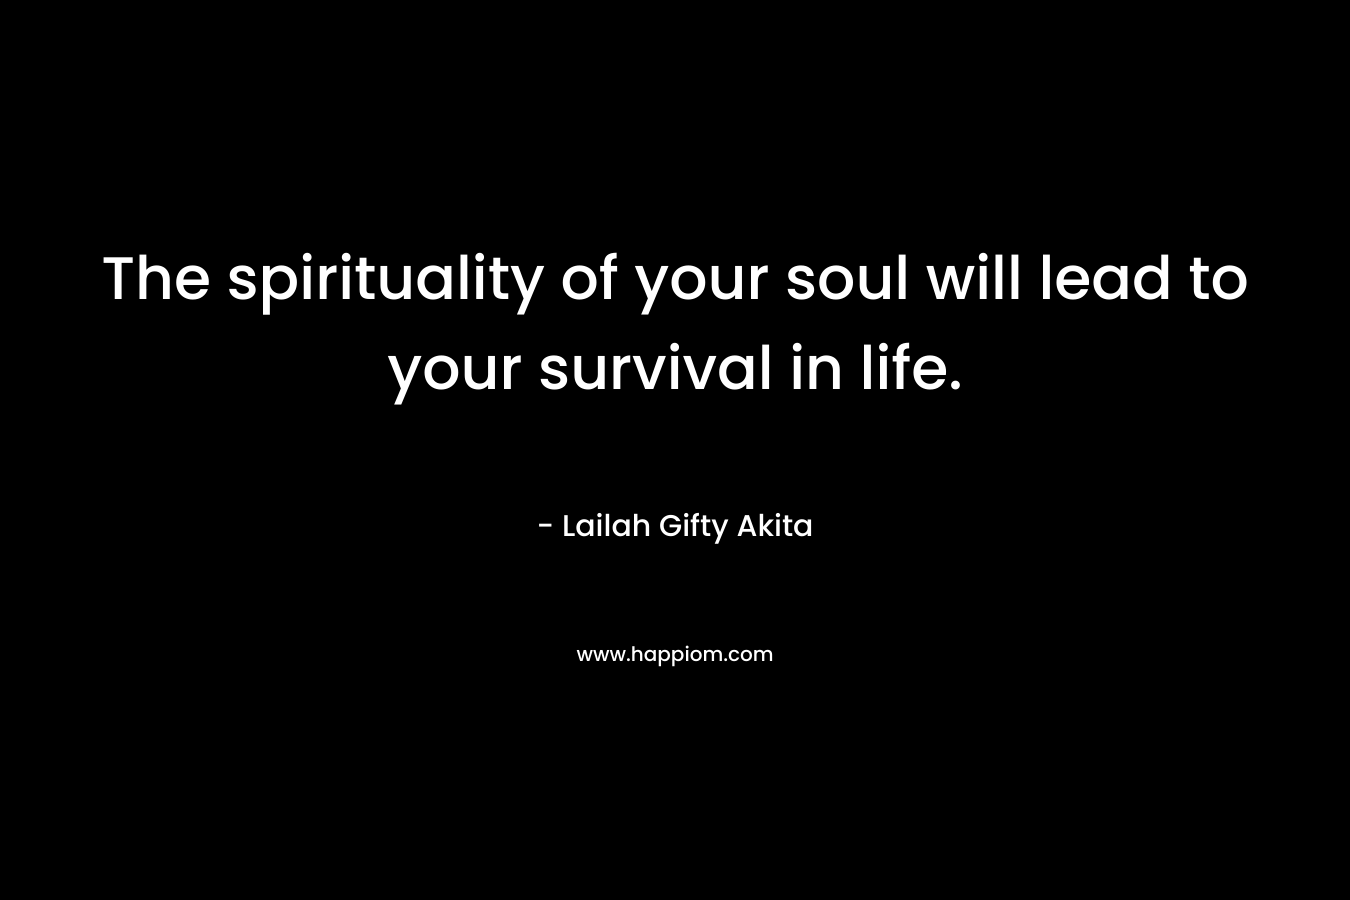 The spirituality of your soul will lead to your survival in life.